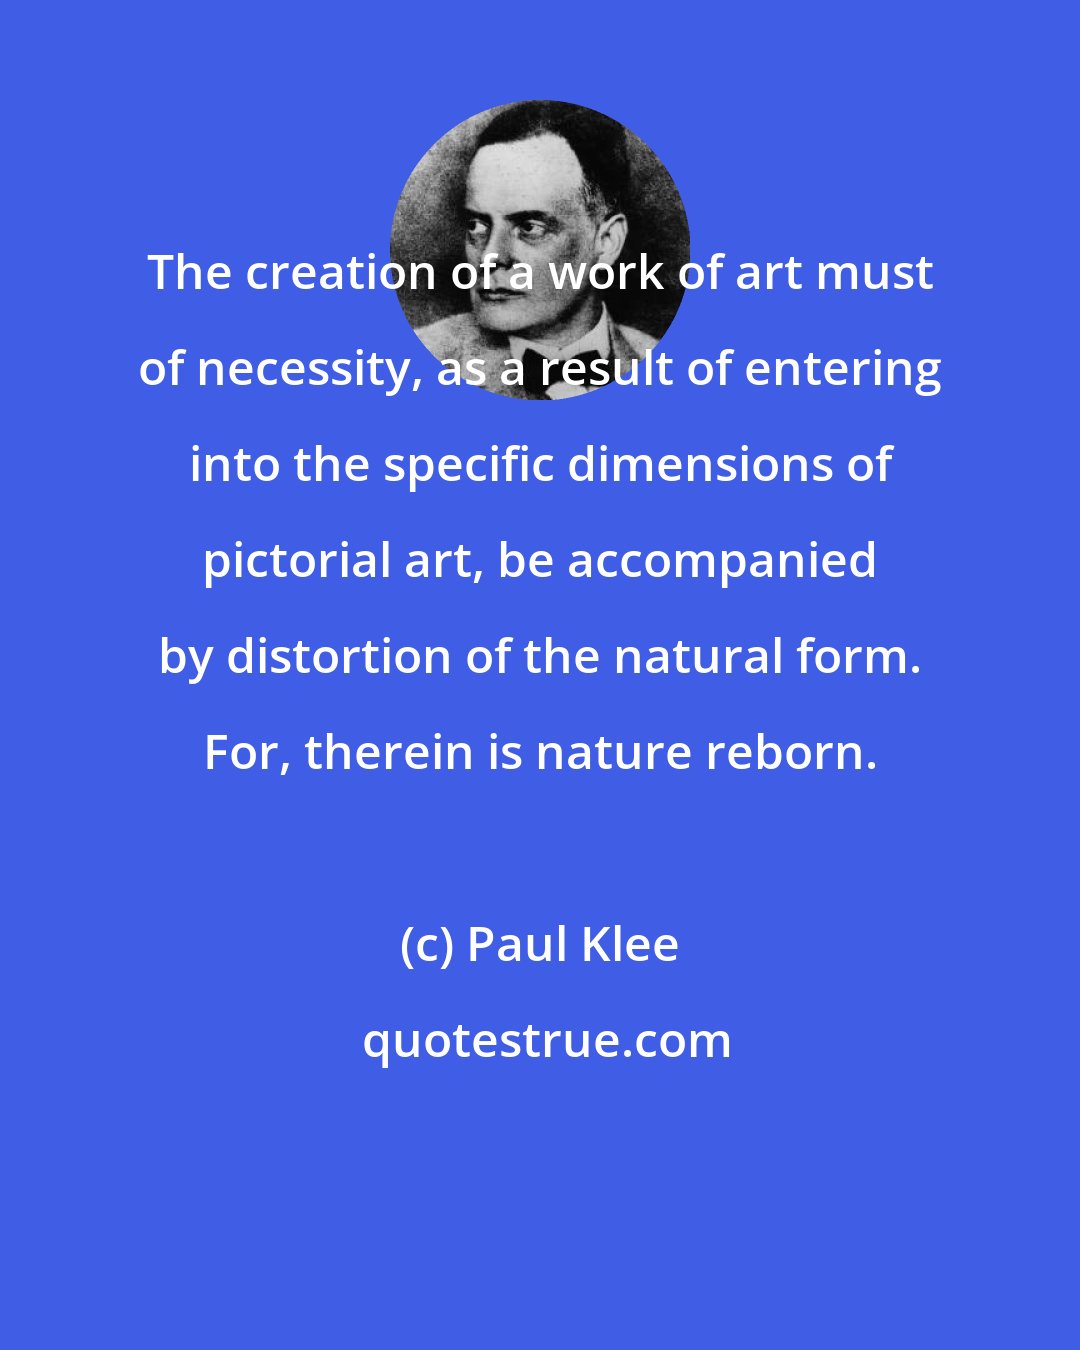 Paul Klee: The creation of a work of art must of necessity, as a result of entering into the specific dimensions of pictorial art, be accompanied by distortion of the natural form. For, therein is nature reborn.